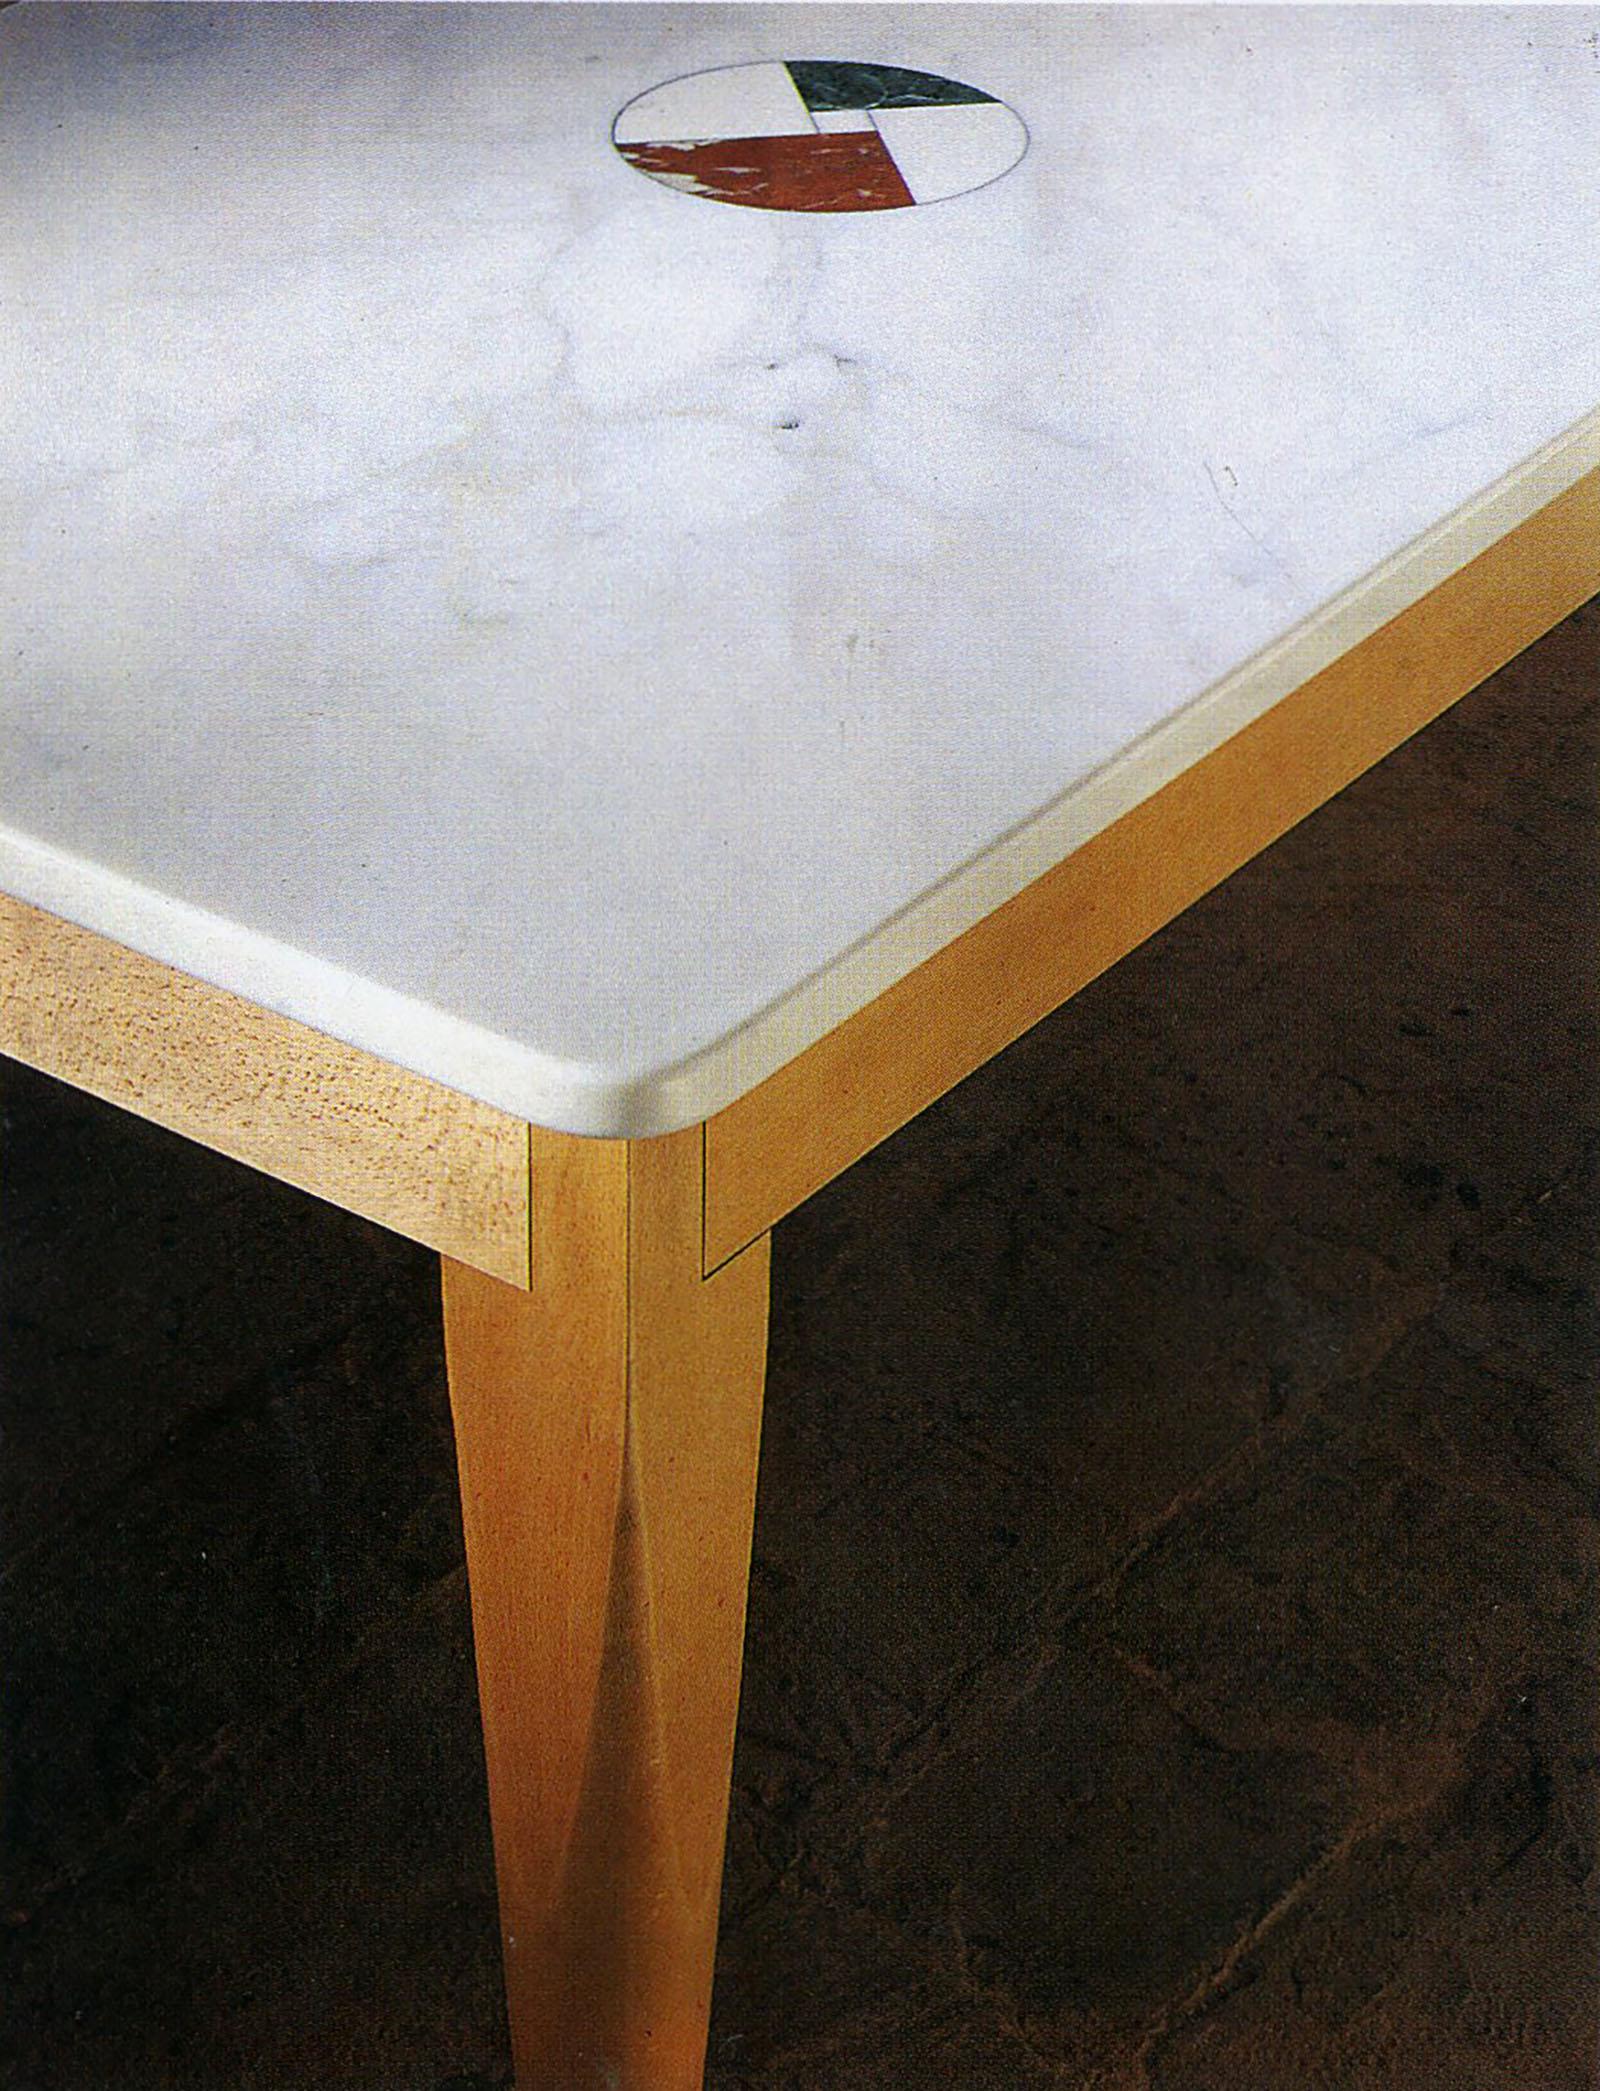 Modern 21st Century by Arch Adolfo Natalini Marble Top Table with Beech Wood Structure For Sale